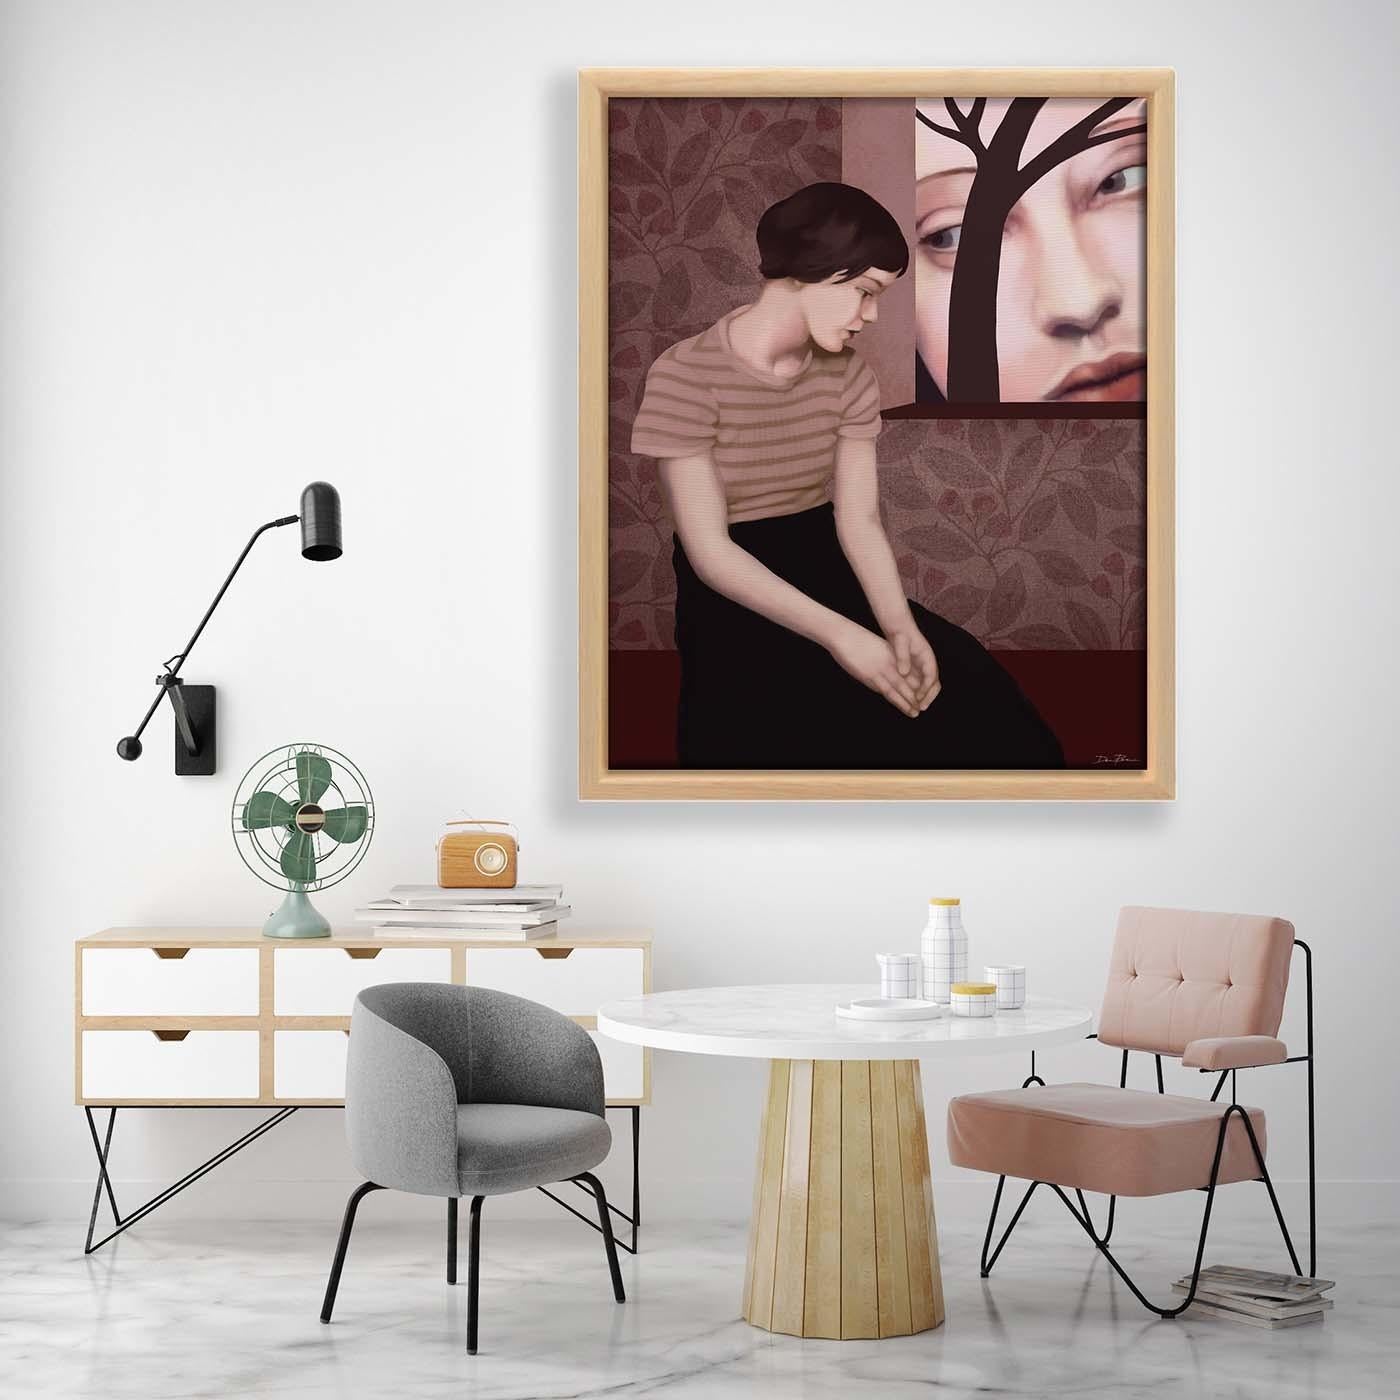 Spying inside represents a room with a view. The decorated walls, detached from the dark floor, symbolize the past. The woman looks in through a window and sees herself with a low gaze that scrutinizes the pain of memories. This fine cotton